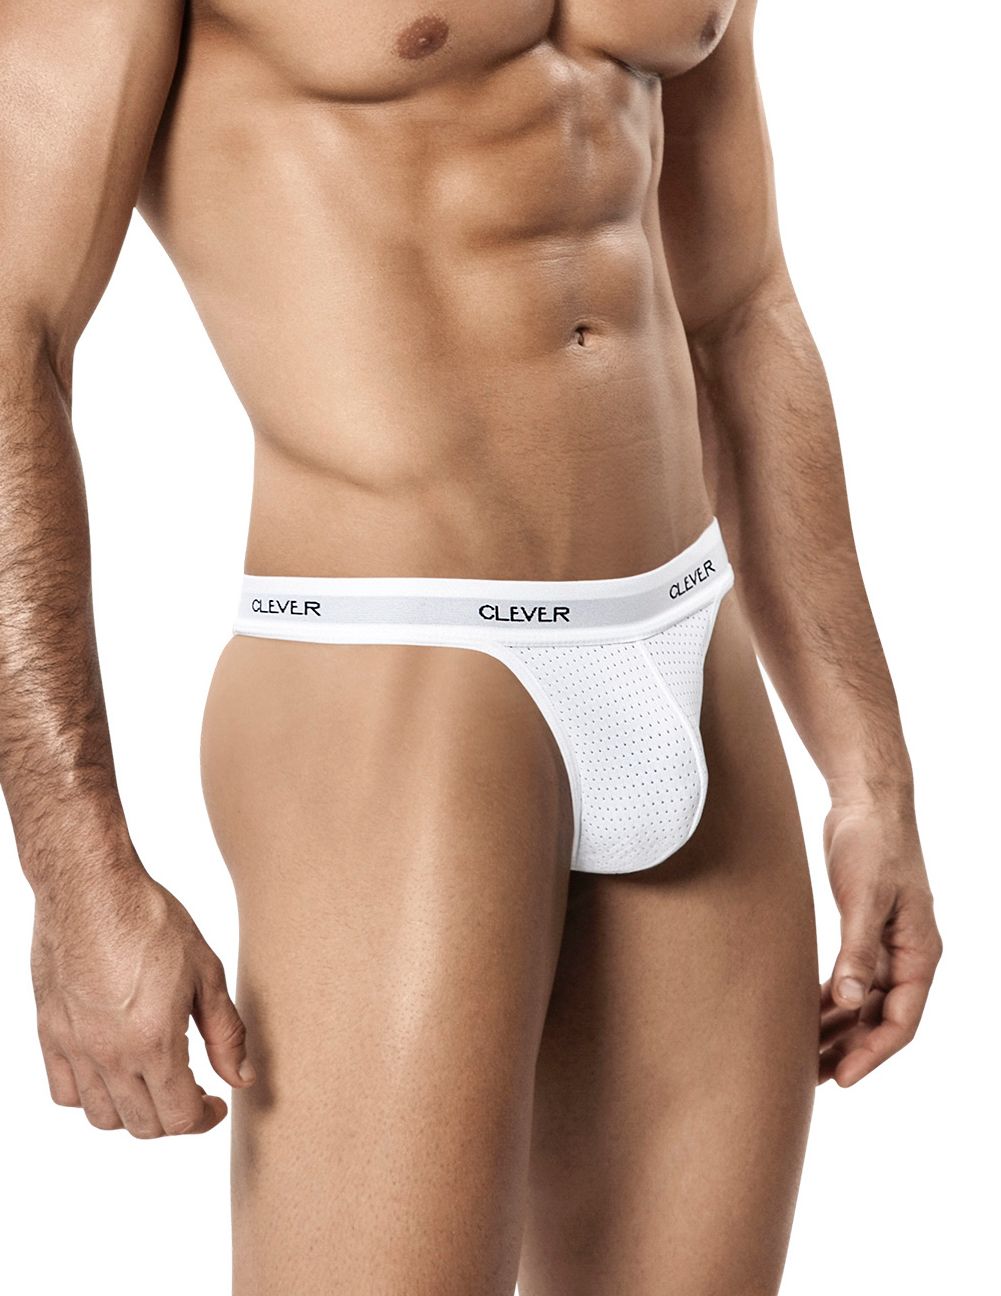 under-yours - Thong Mesh - Clever - Mens Underwear